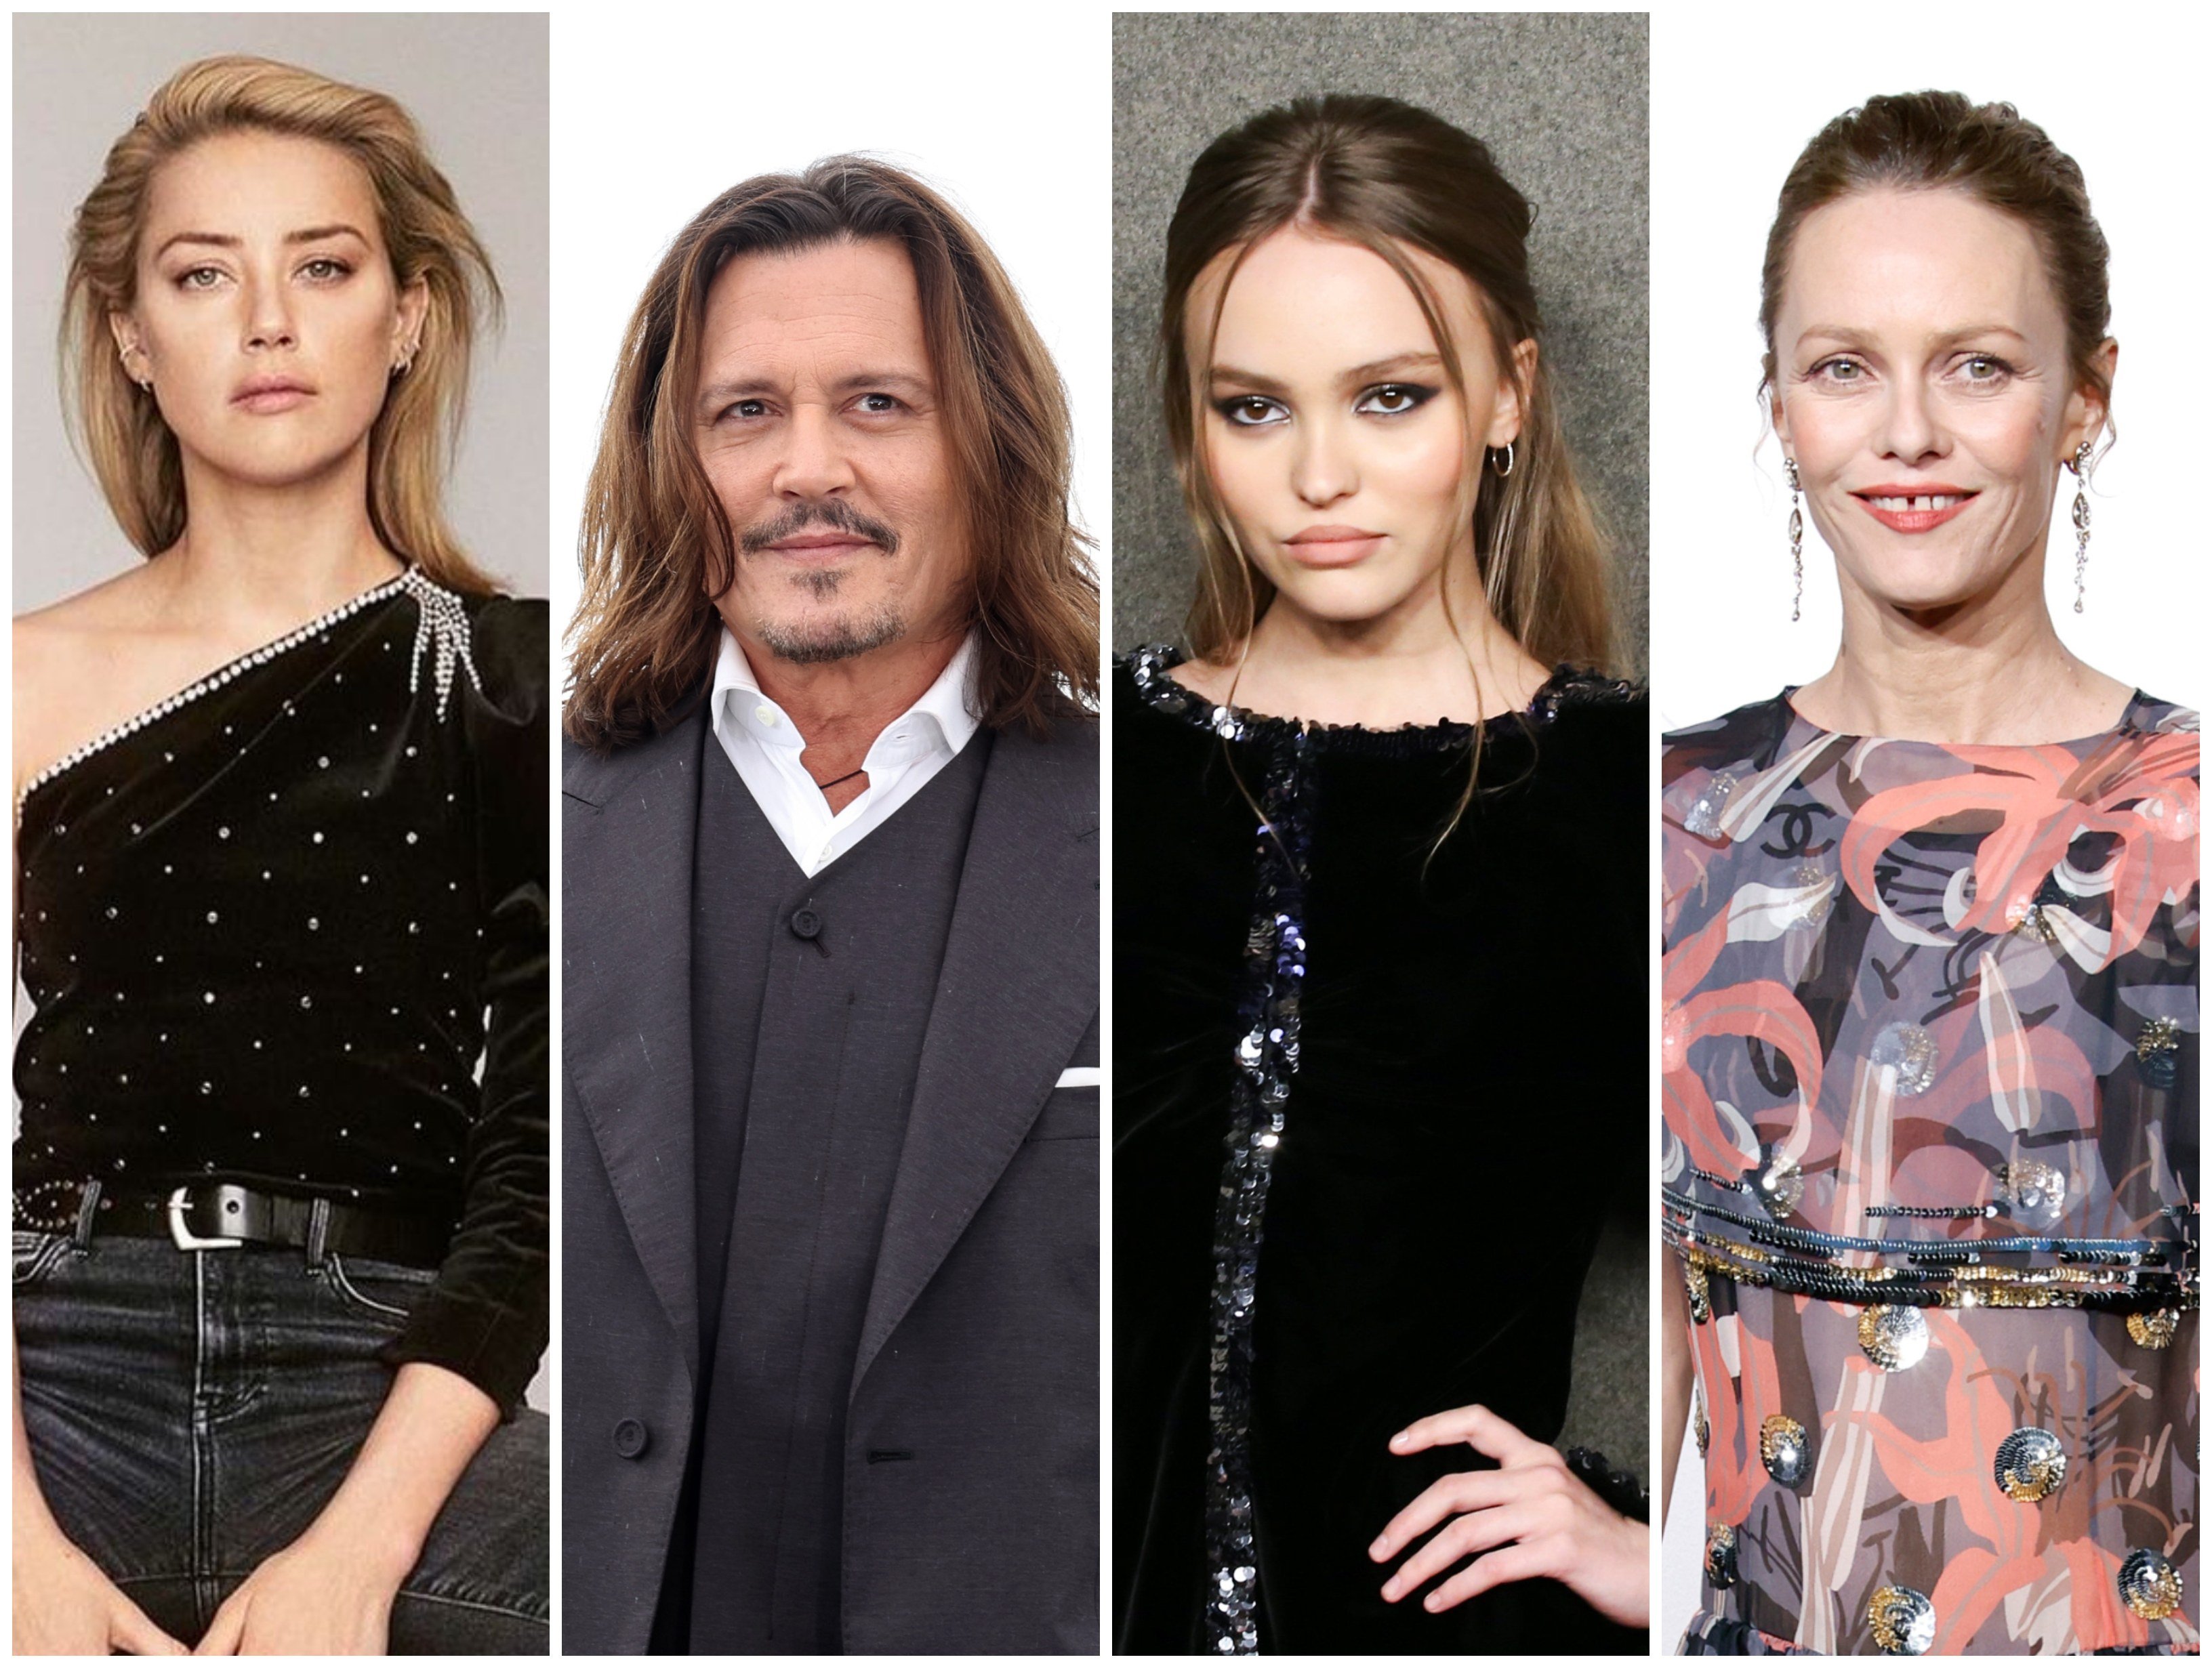 Amber Heard, Johnny Depp, Lily-Rose Depp and Vanessa Paradis are all part of the Depp clan, but who’s the richest? Photos: @amberheard/Instagram, EPA-EFE, Reuters, Getty Images